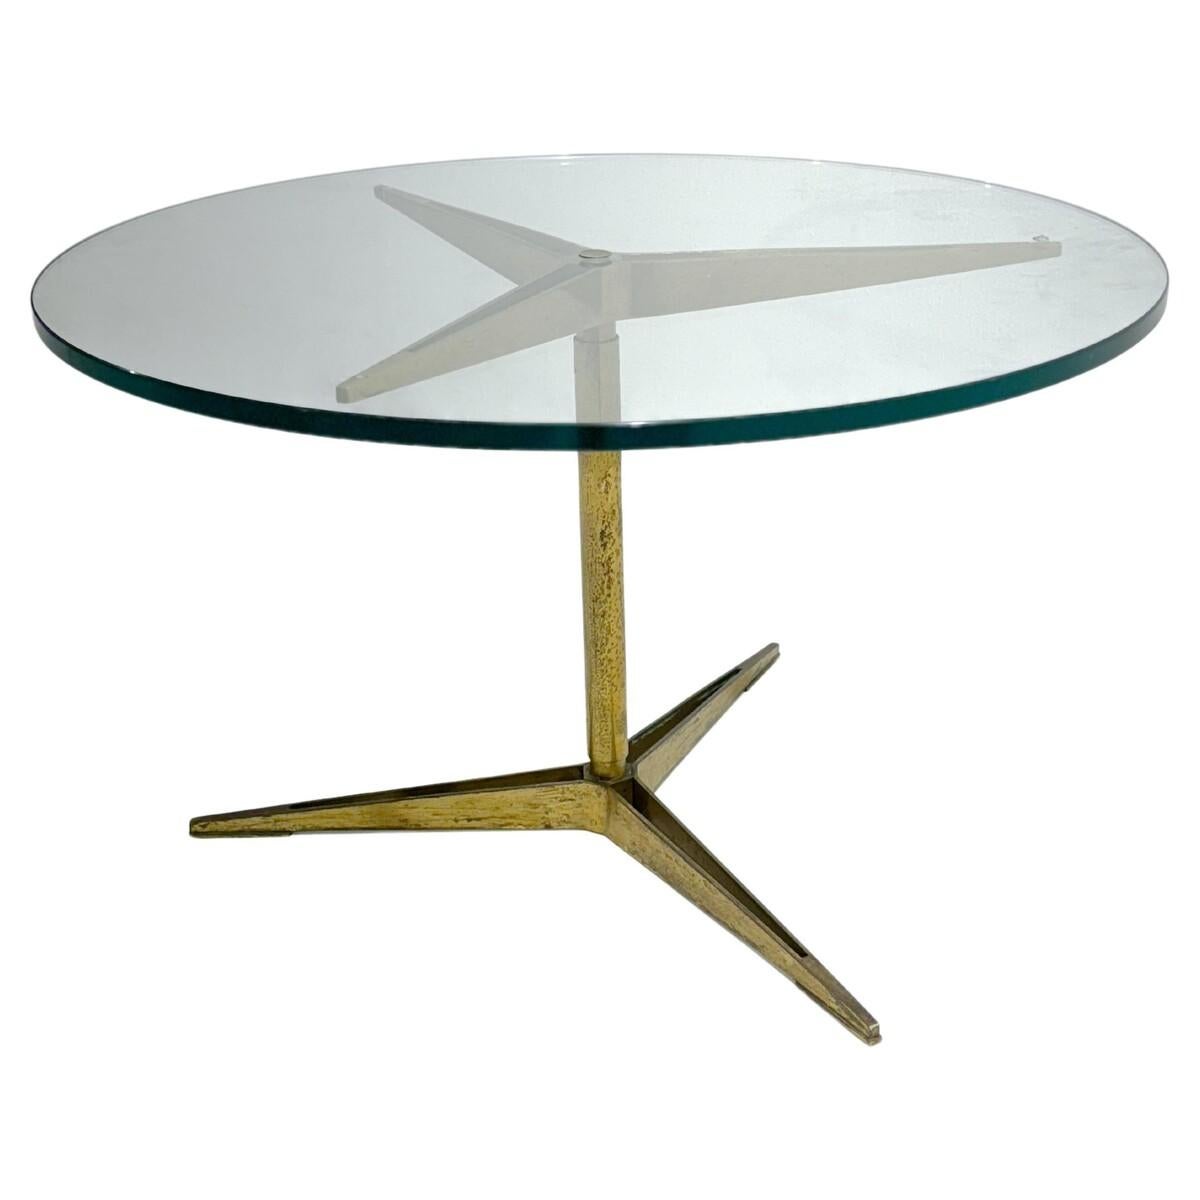 Italian Mid-Century Modern Side Table 1128 by Gio Ponti, Singer and Sons, 1950s